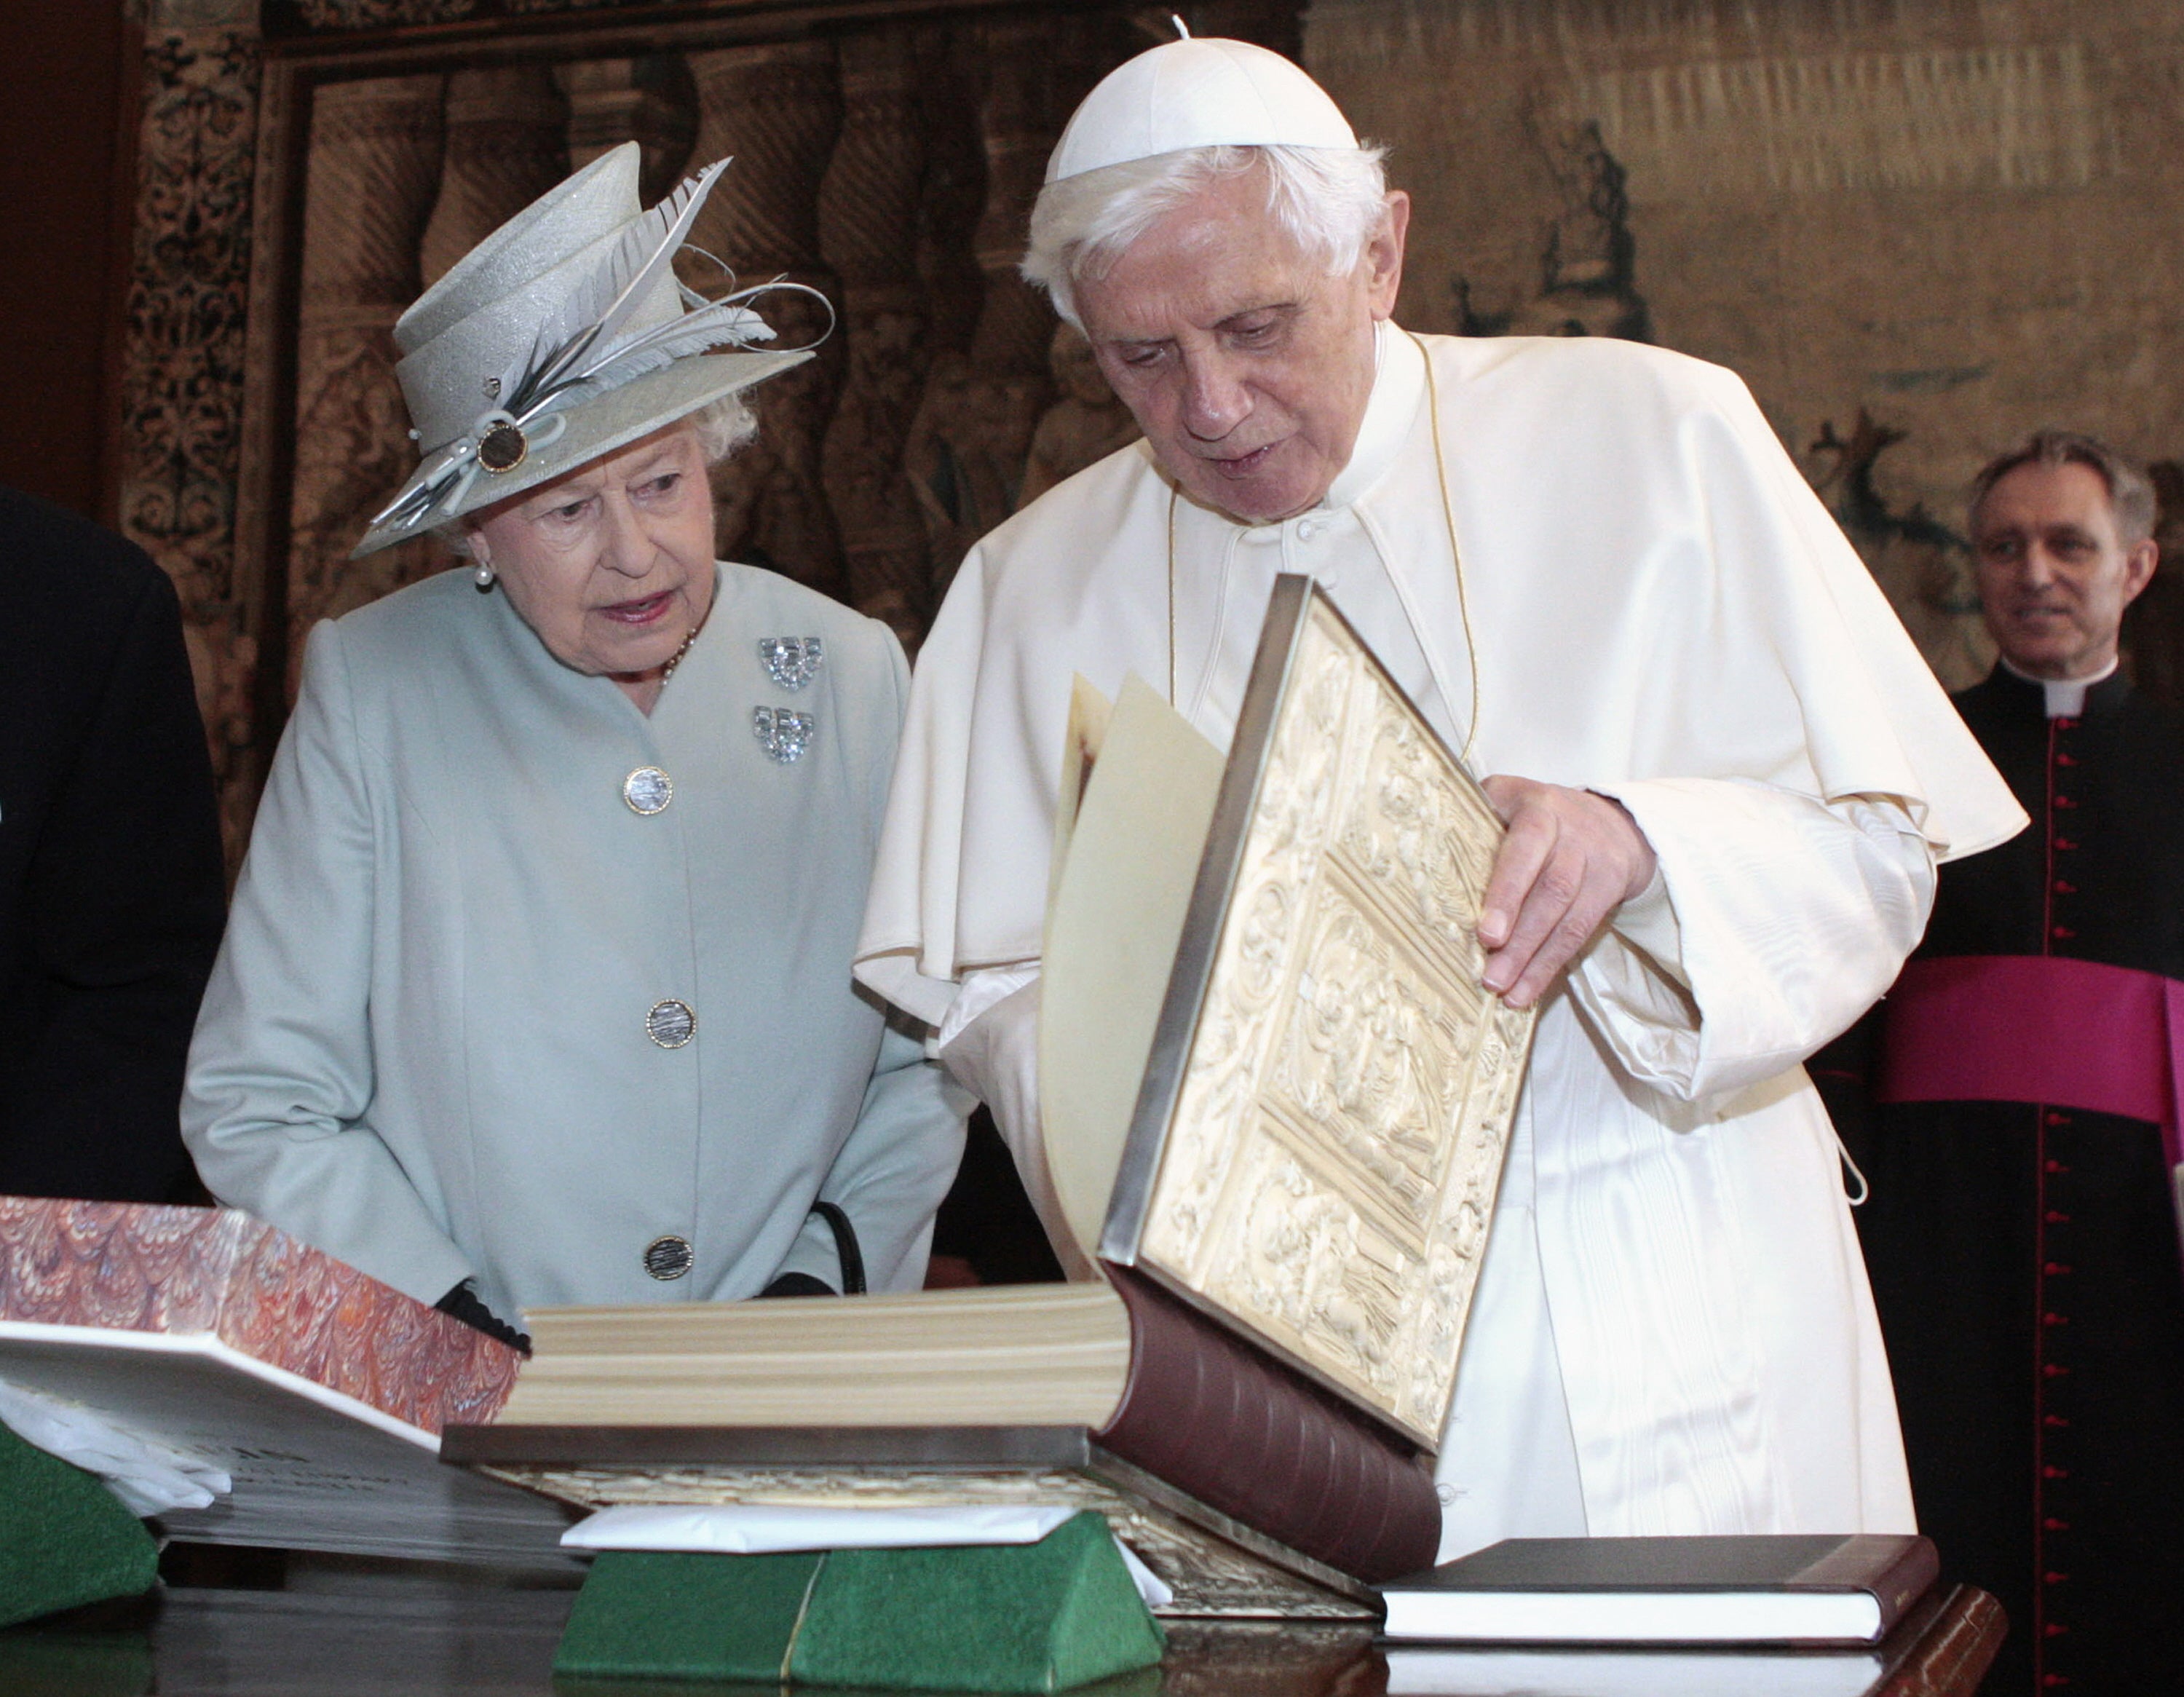 Queen Elizabeth II talking with Pope Benedict XVI during an audience in the Morning Drawing Room at the Palace of Holyroodhouse in Edinburgh during a four day visit by the Pope to the UK, 2010